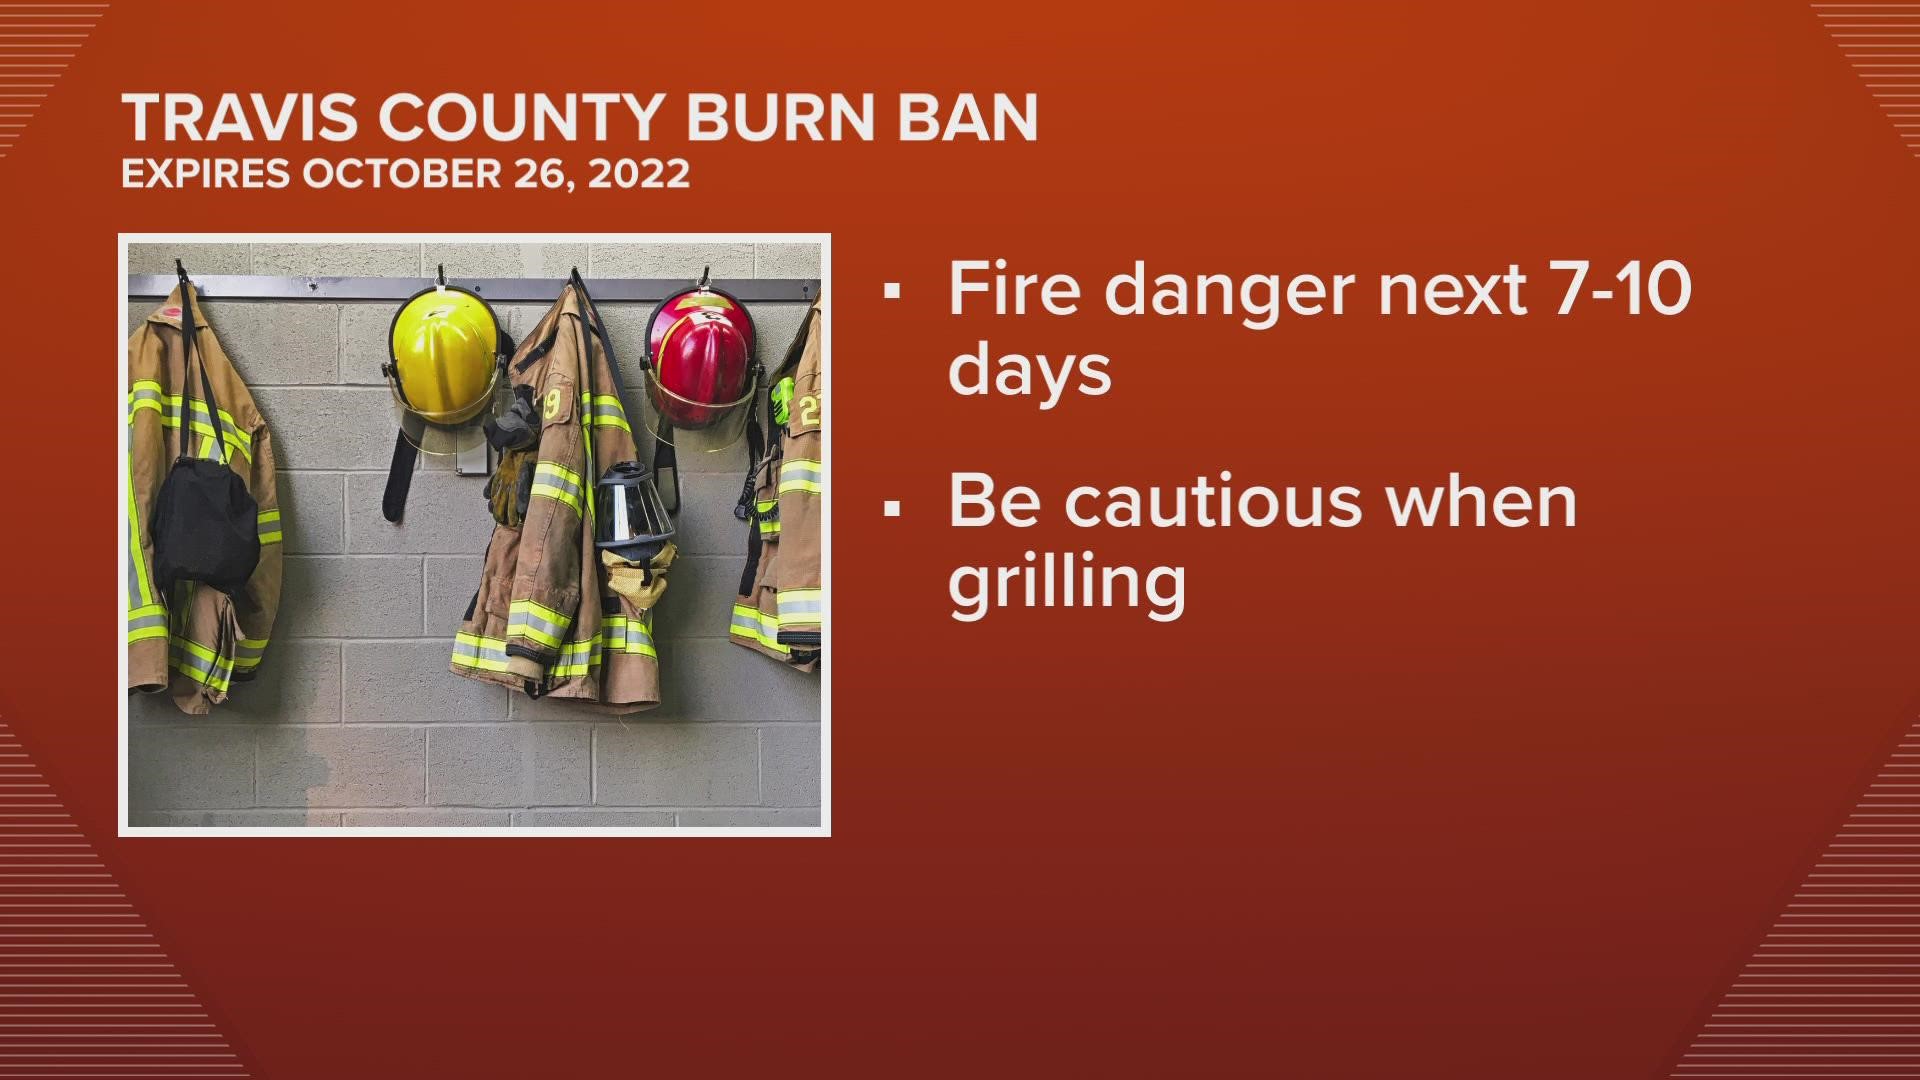 Experts say fire danger will increase over the next seven to 10 days due to minimal rain changes and humidity levels dropping.